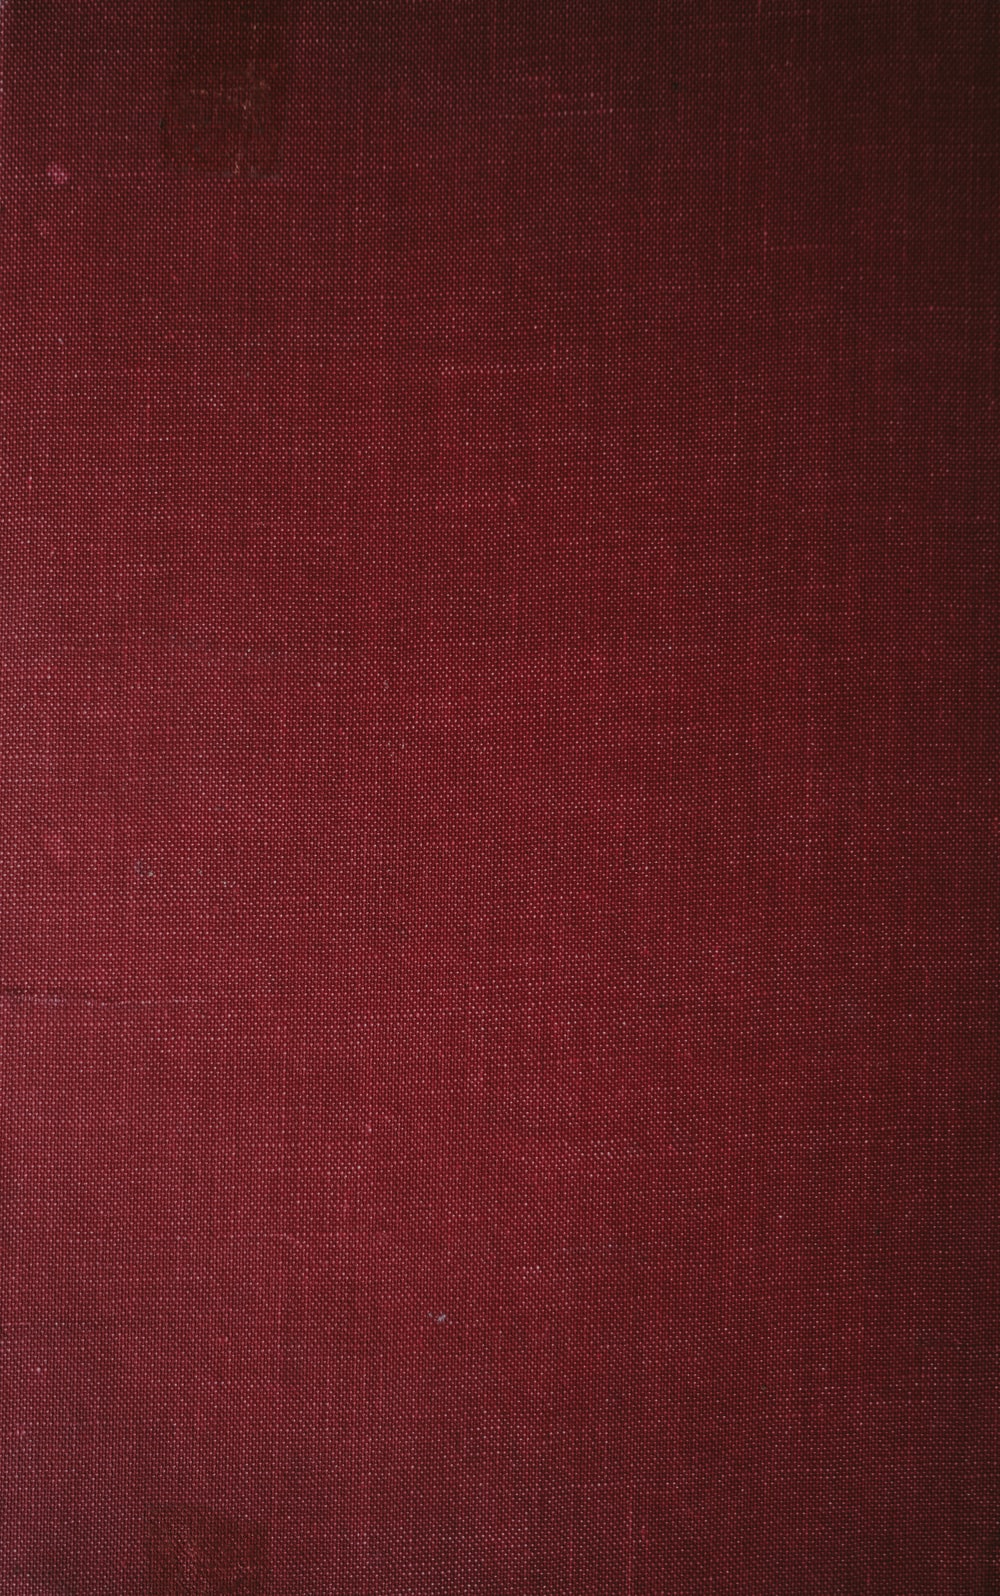 Fabric Texture Picture. Download Free Image